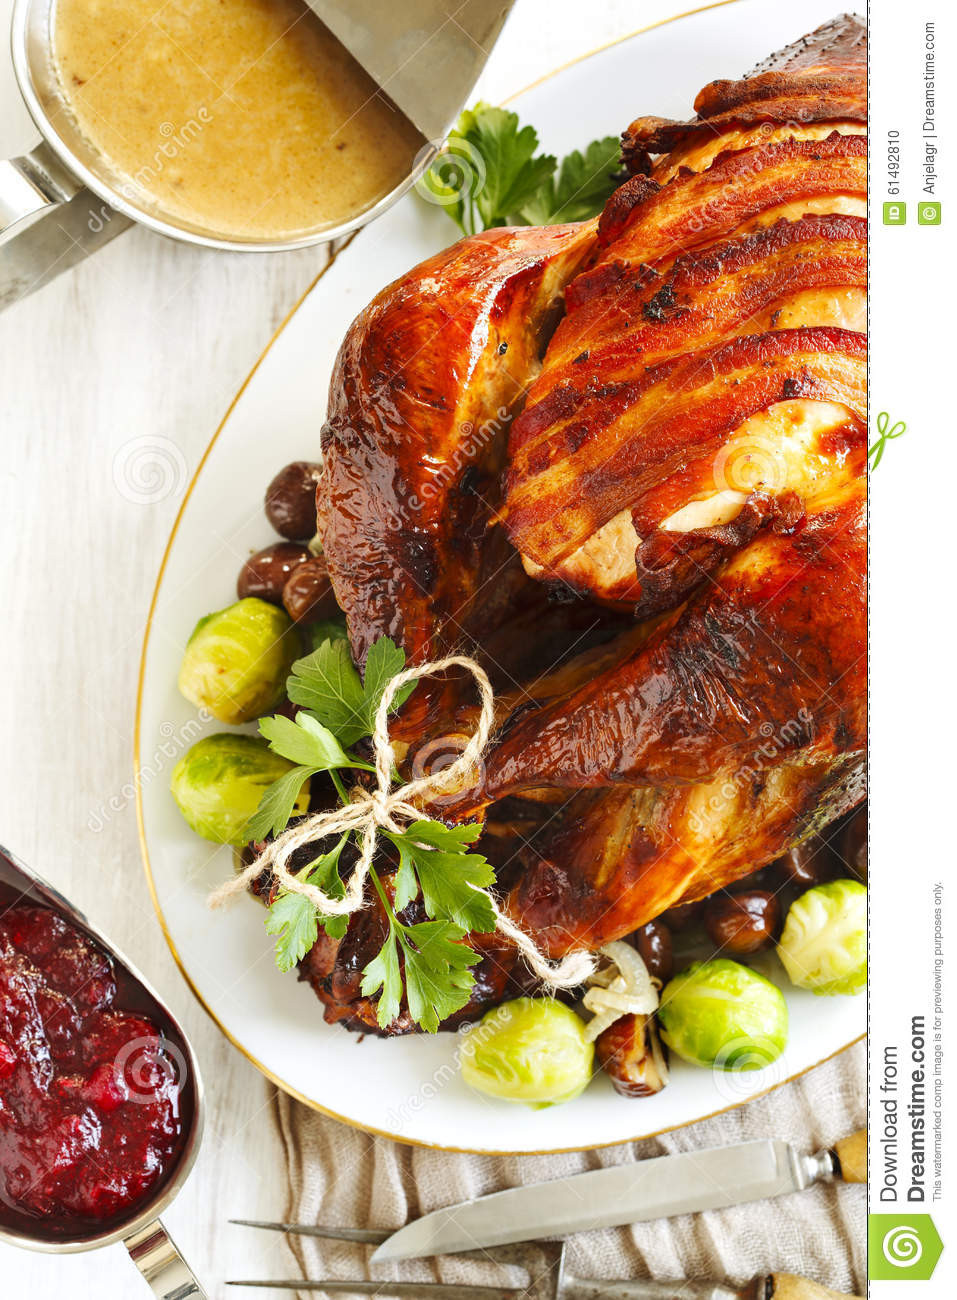 Prepared Christmas Dinners To Go
 Roasted Turkey With Bacon And Garnished With Chestnuts And